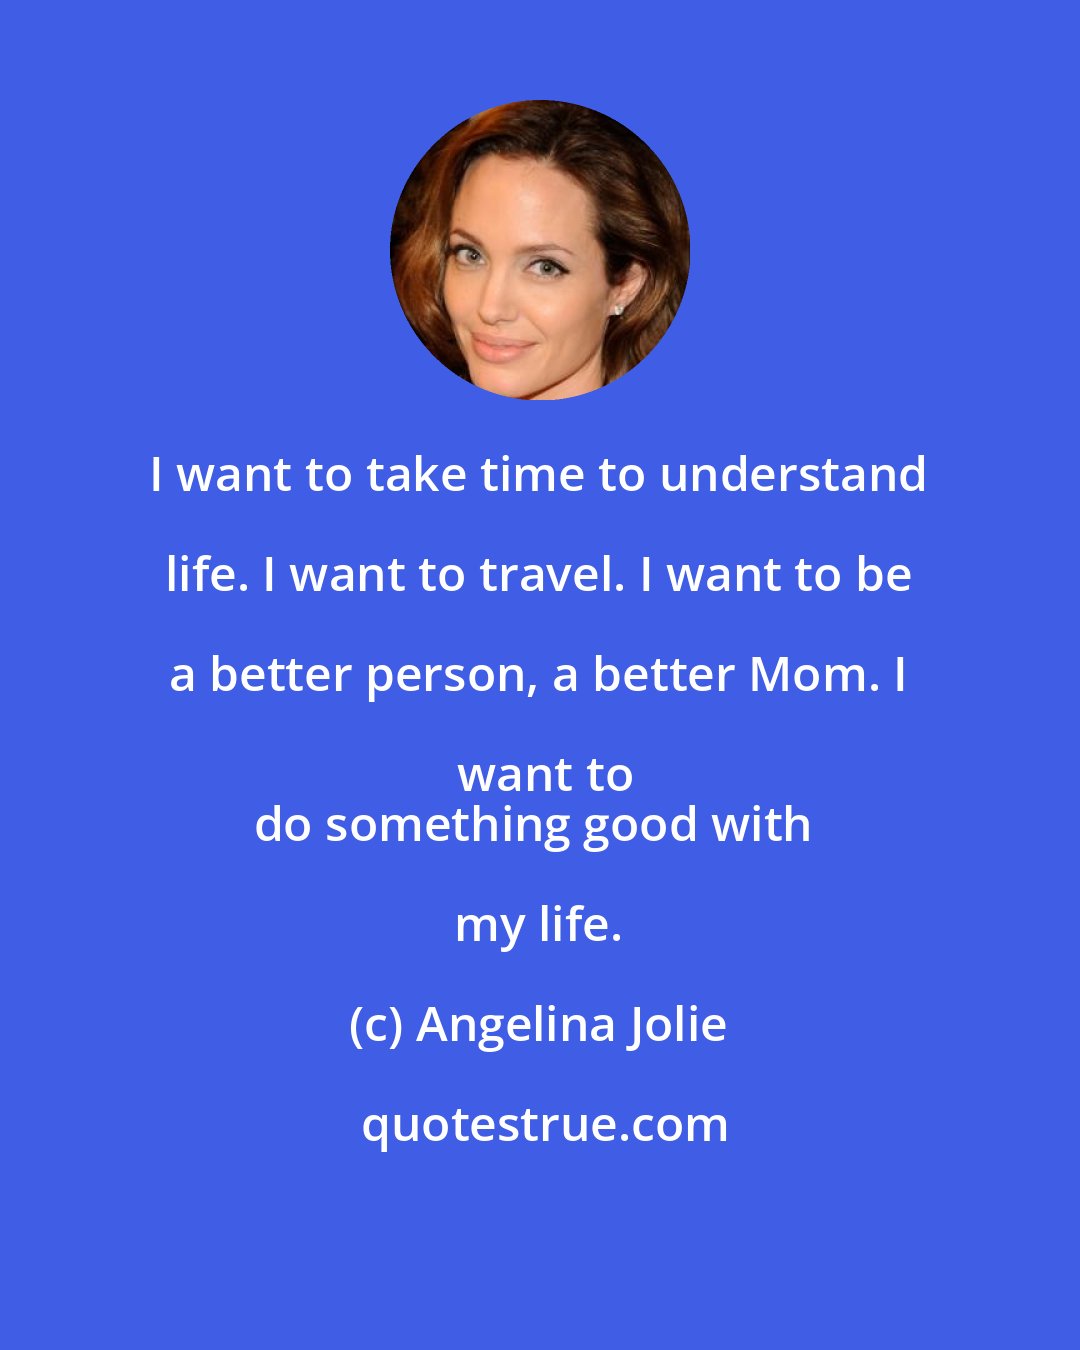 Angelina Jolie: I want to take time to understand life. I want to travel. I want to be a better person, a better Mom. I want to
do something good with my life.